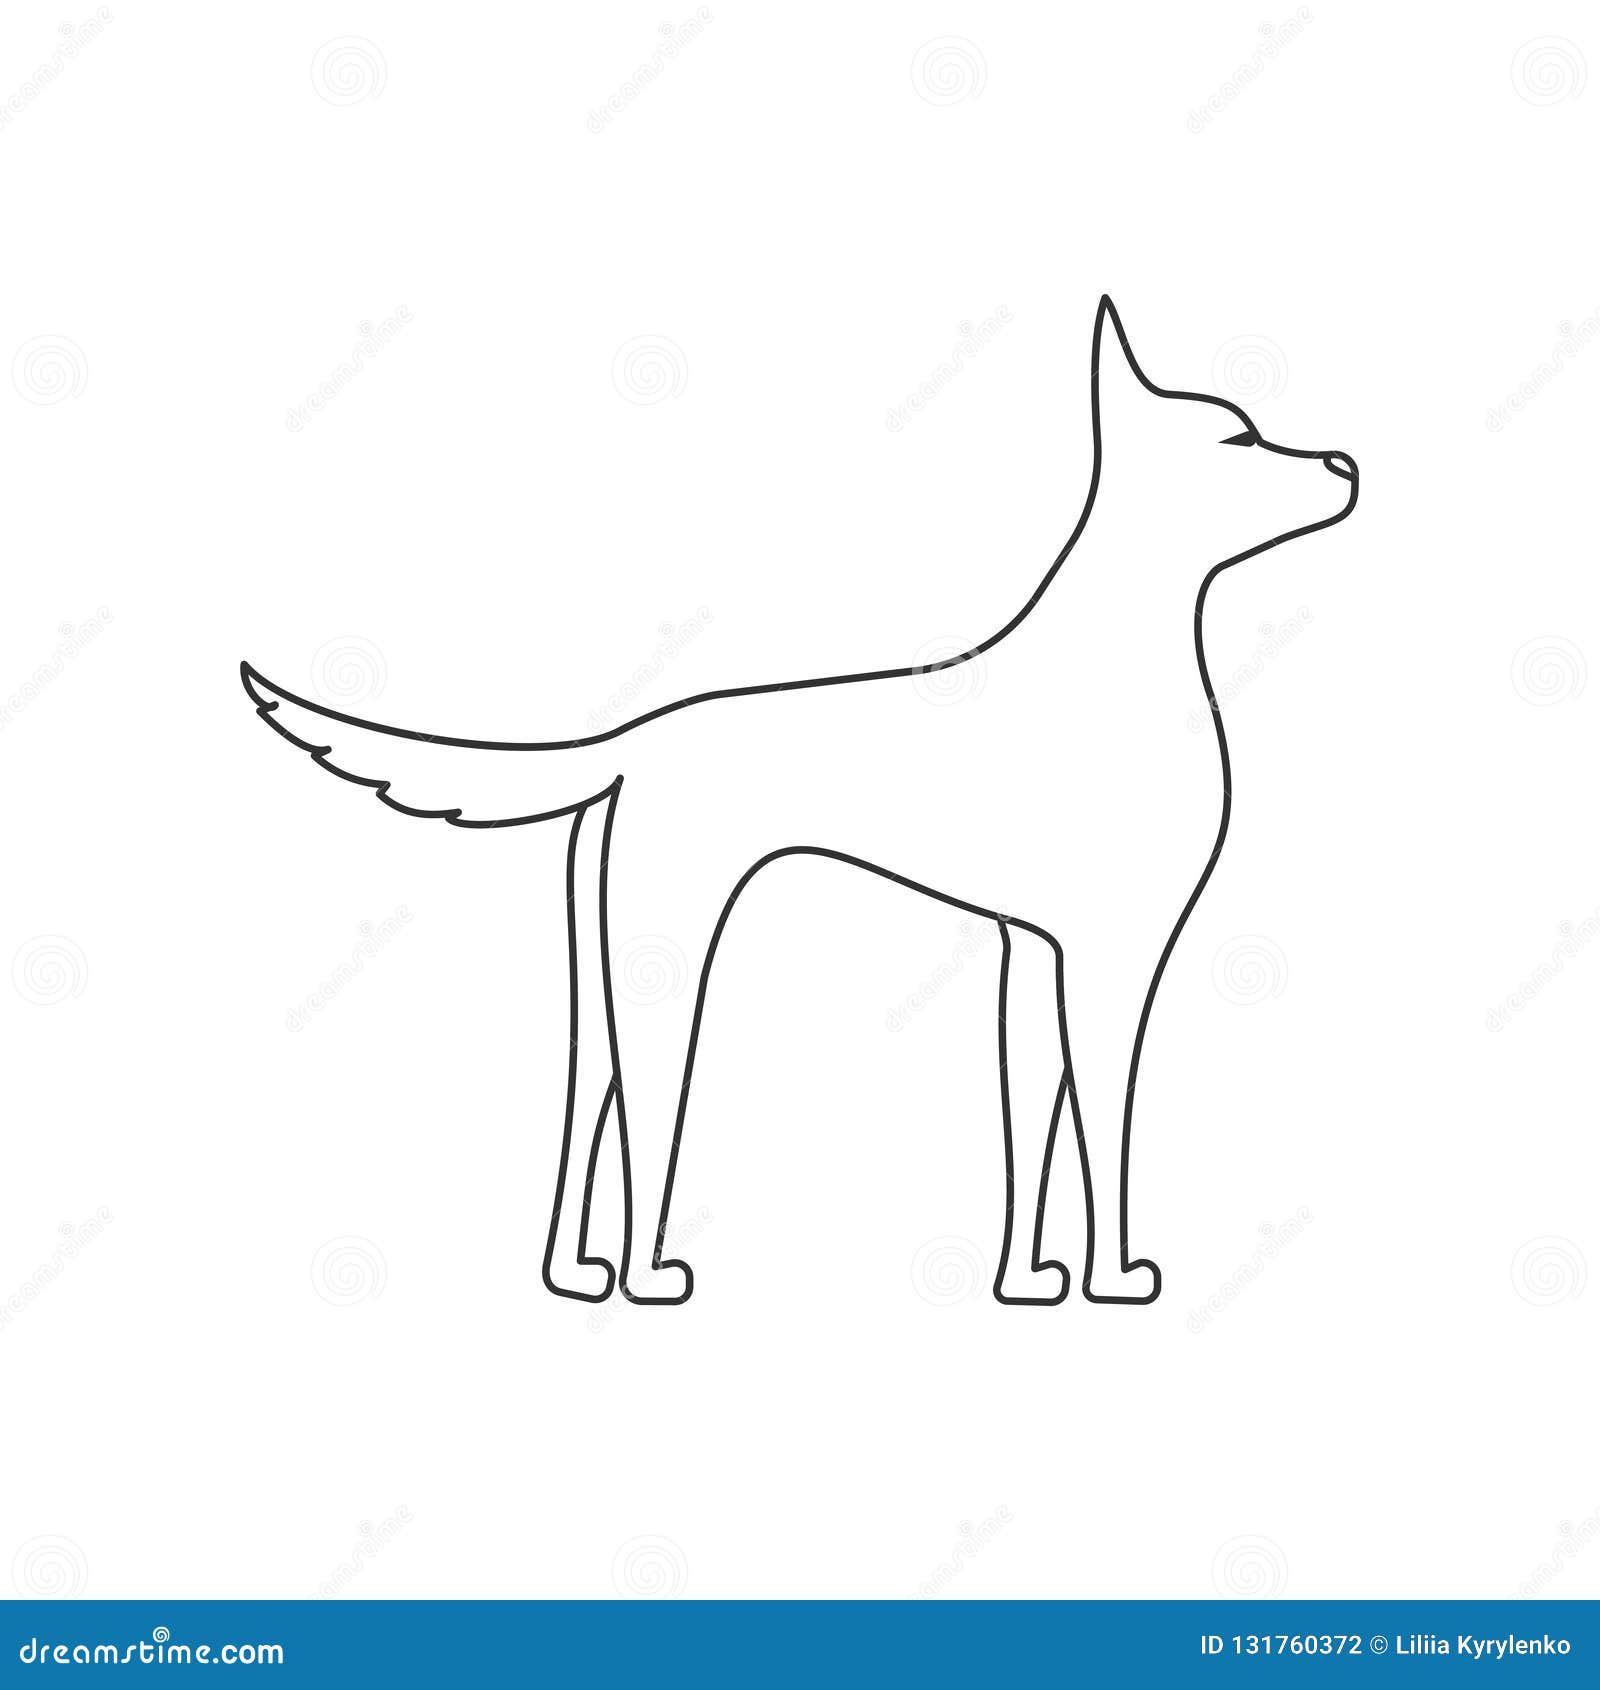 Dog Side View Linear Illustration. Pets And Grooming